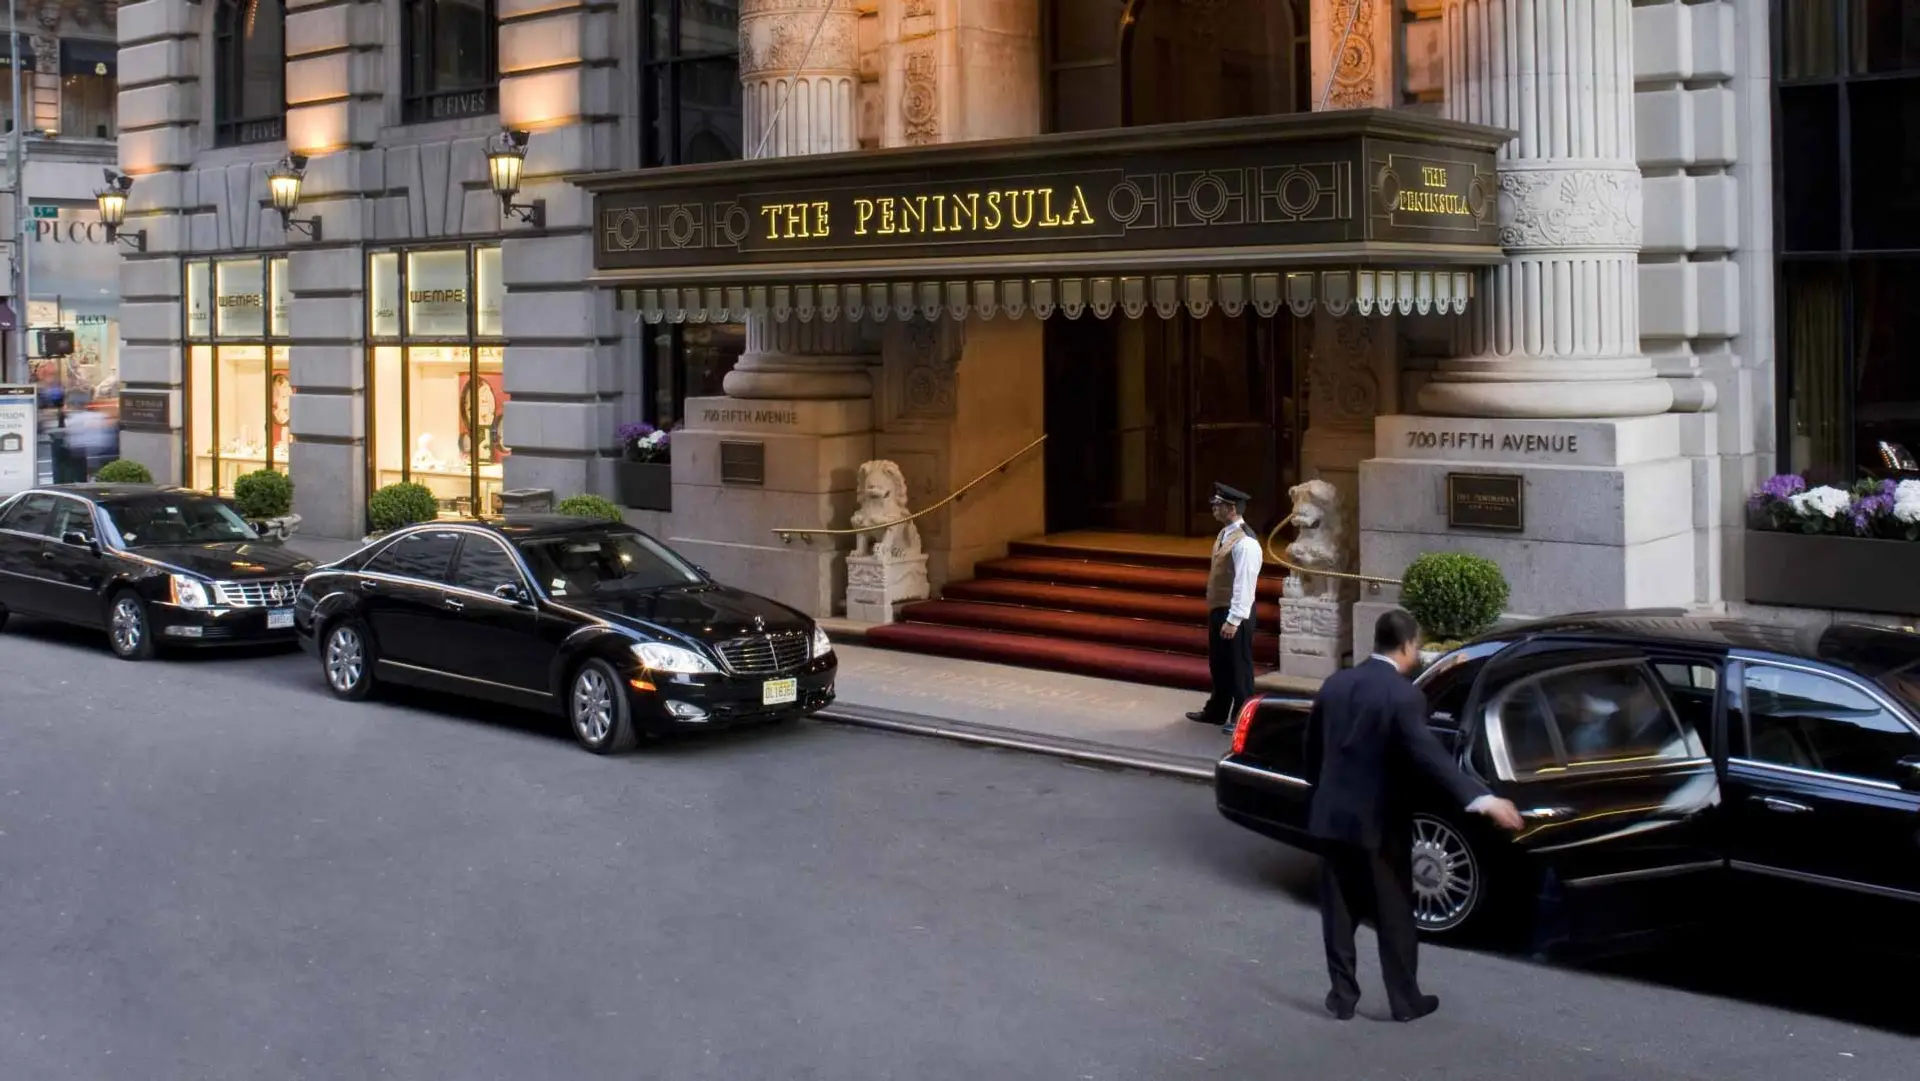 Hotel review Location' - The Peninsula New York - 1